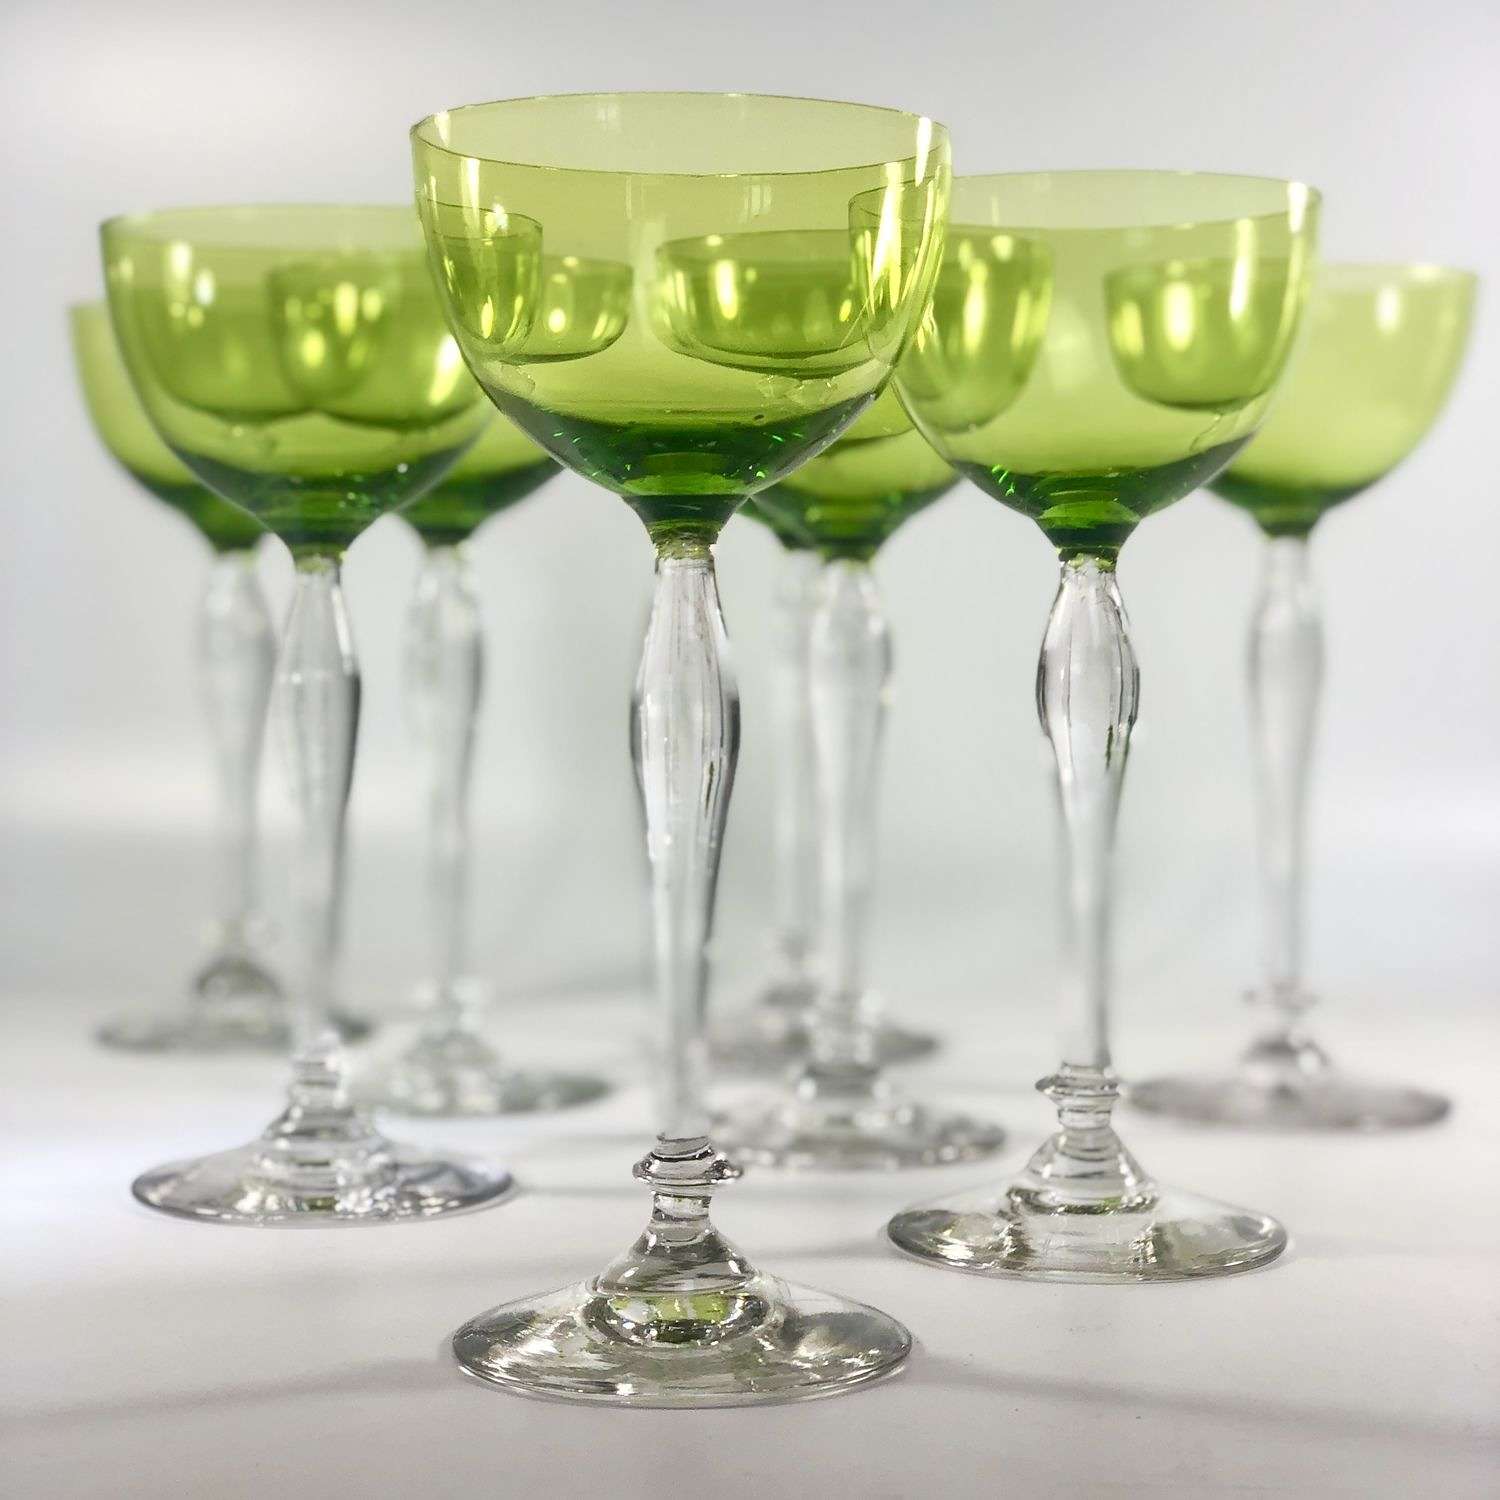 8 Chartreuse green finest crystal tall wine glasses